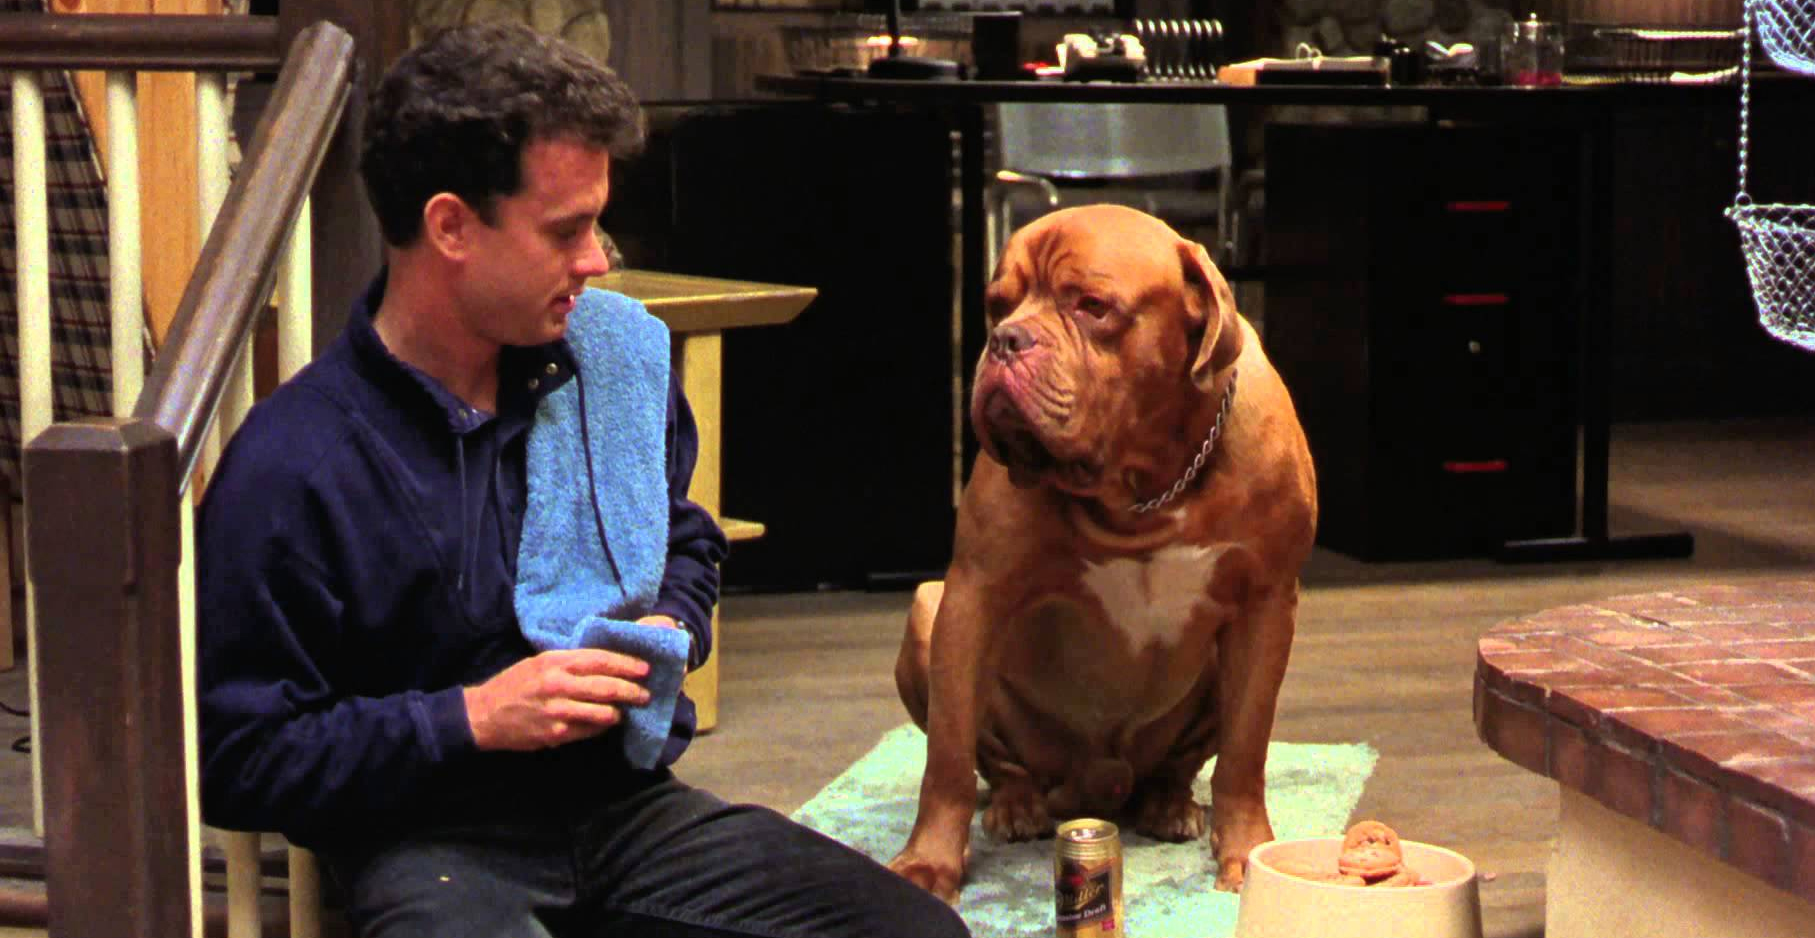 what kind of dog is in the movie turner and hooch